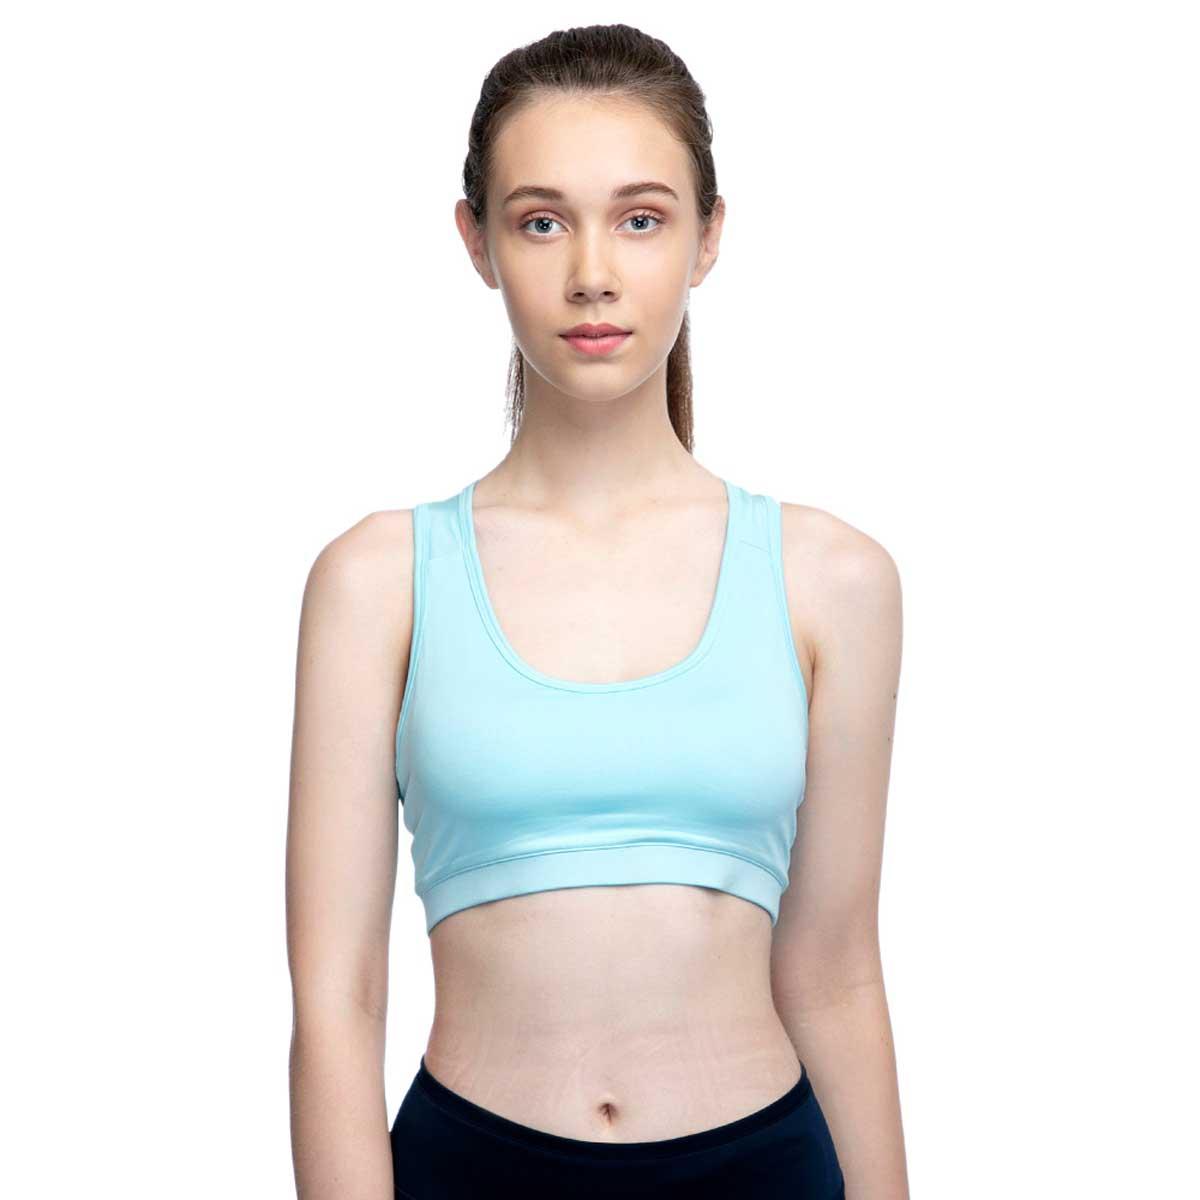 Buy Reebok Training Sports Bra (Blue) Online at Lowest Price in India